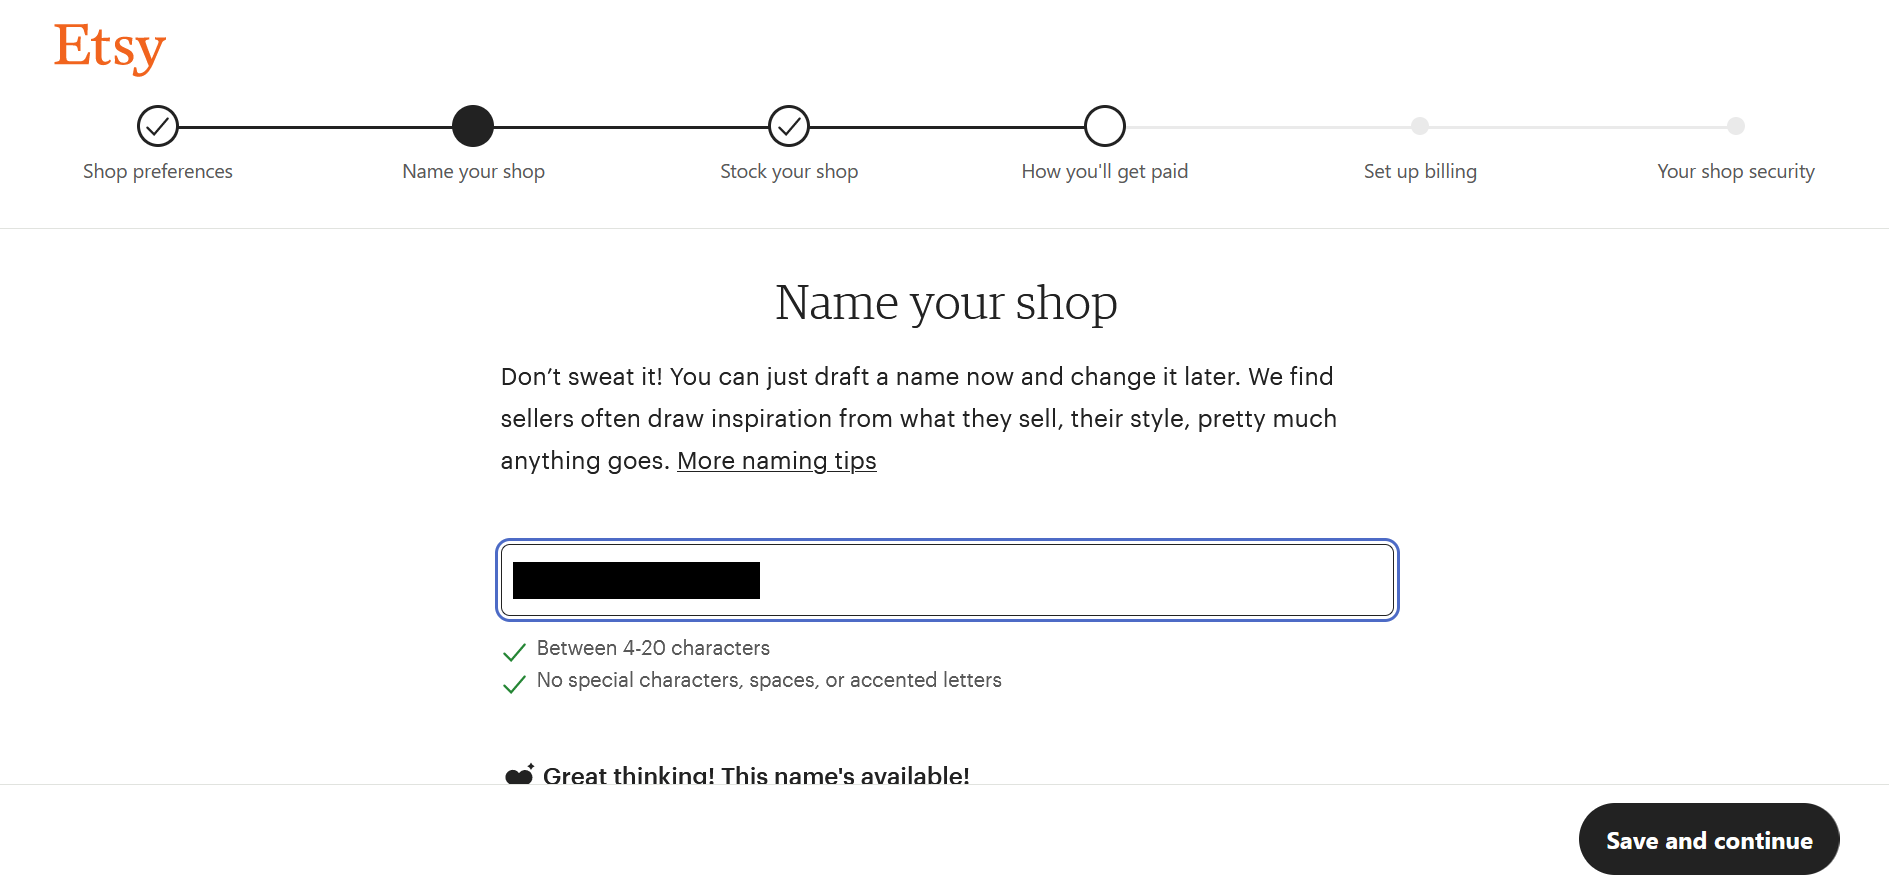 Screenshot of page to name an Etsy store